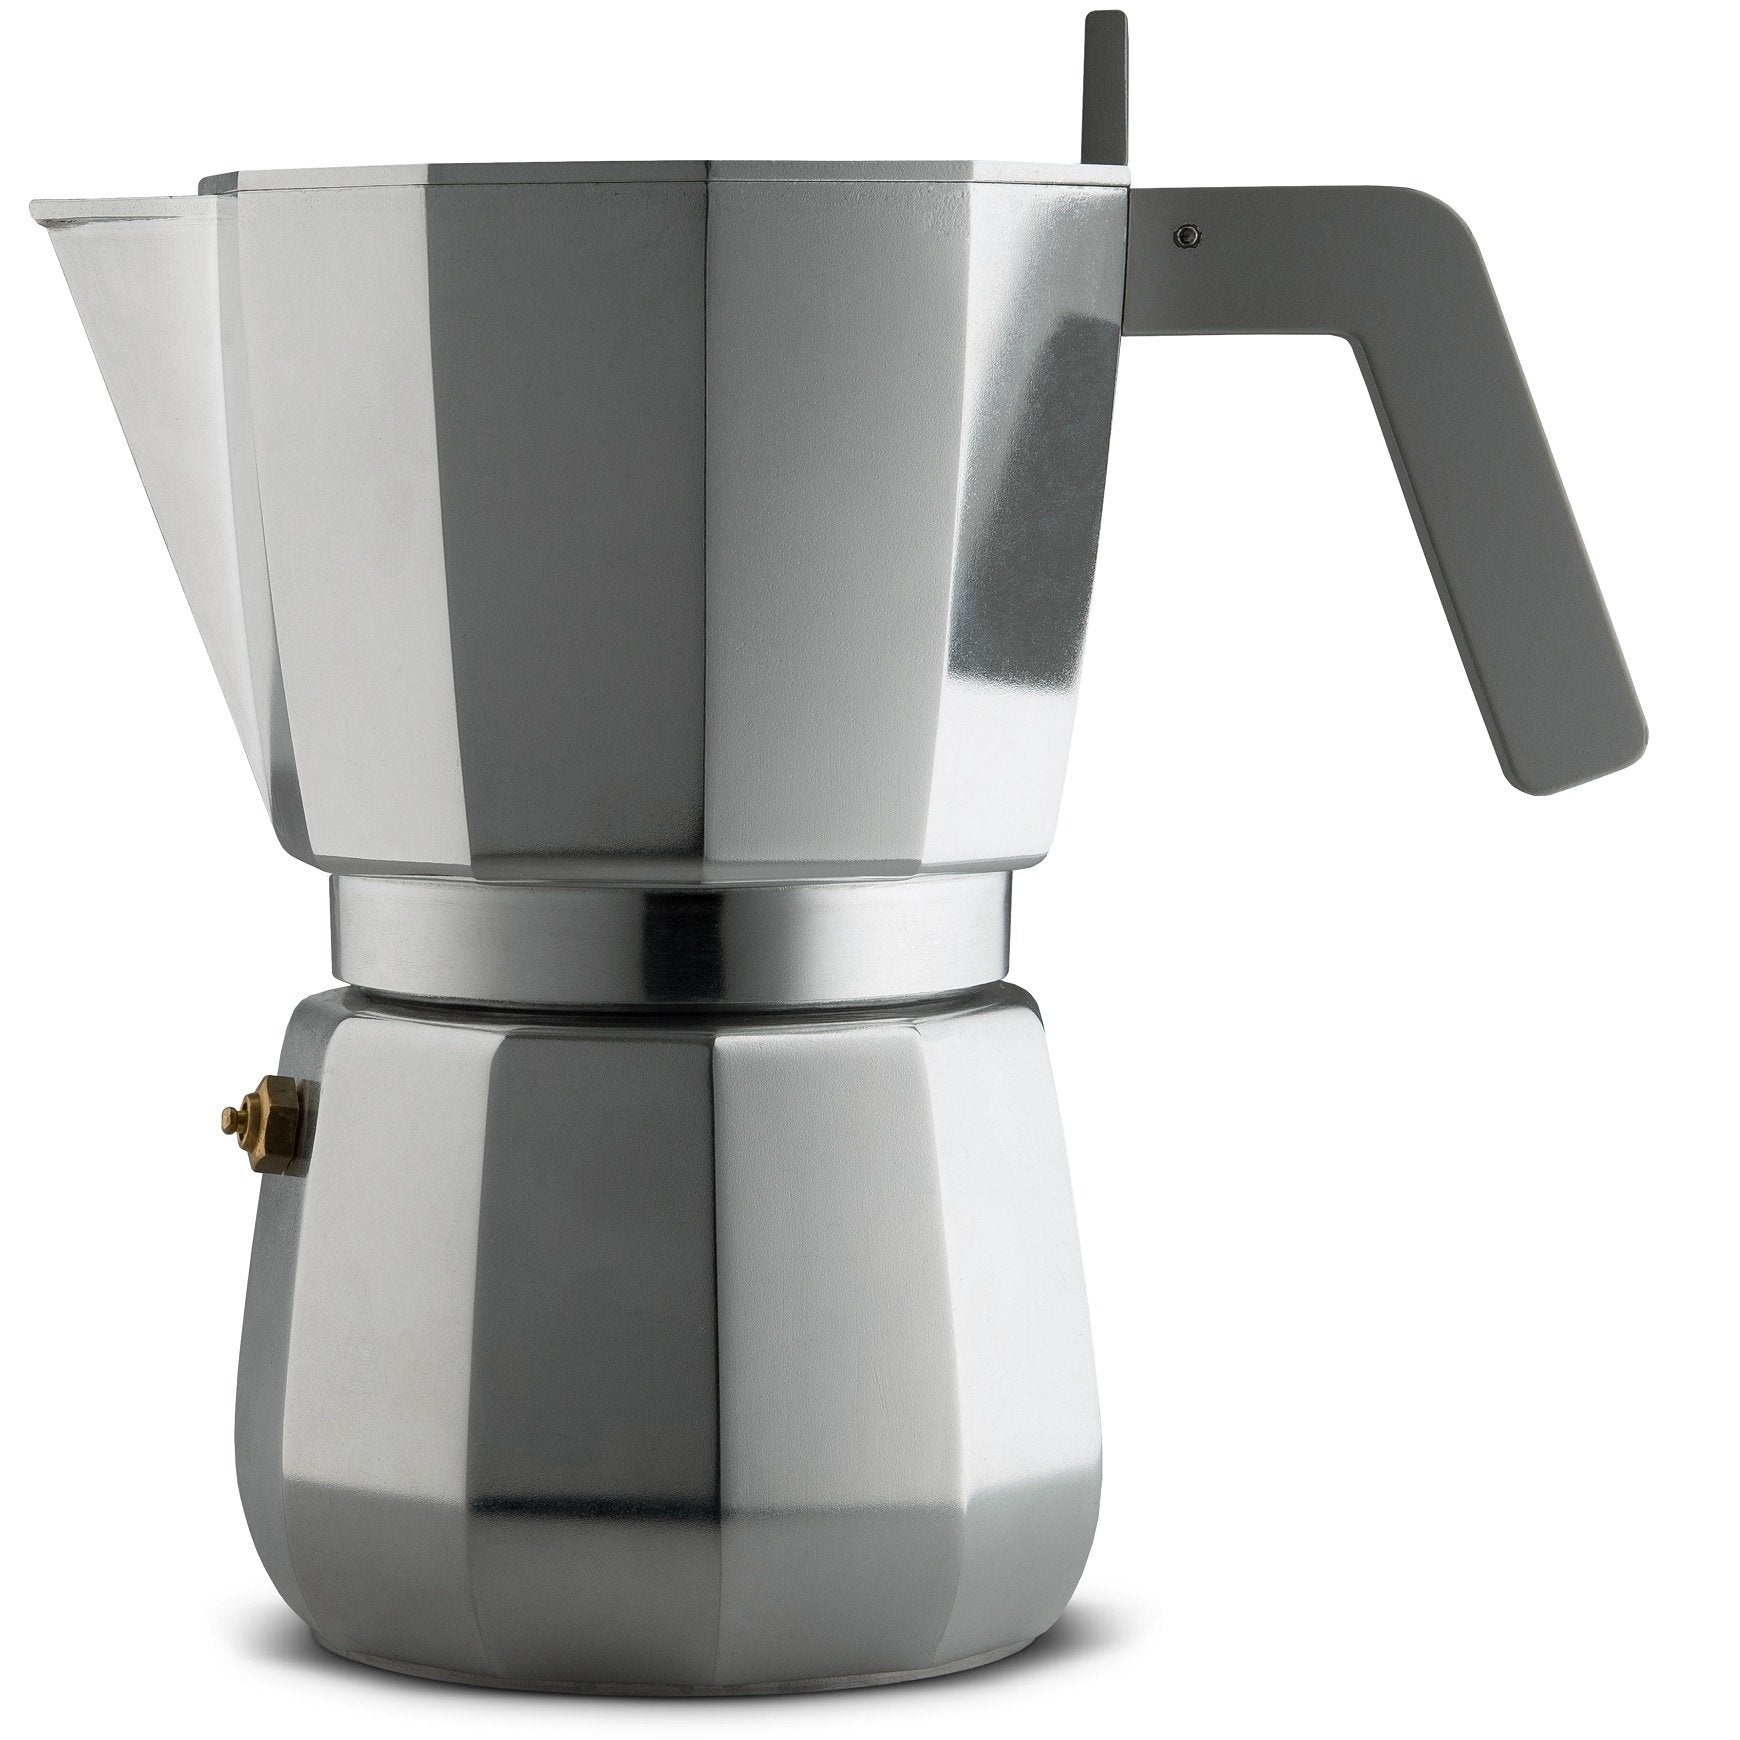 Italian Moka Pot 2 Cups,Induction Coffee Maker Suitable for All Types of  Plates, Espresso Coffee Maker,Coffee Maker 